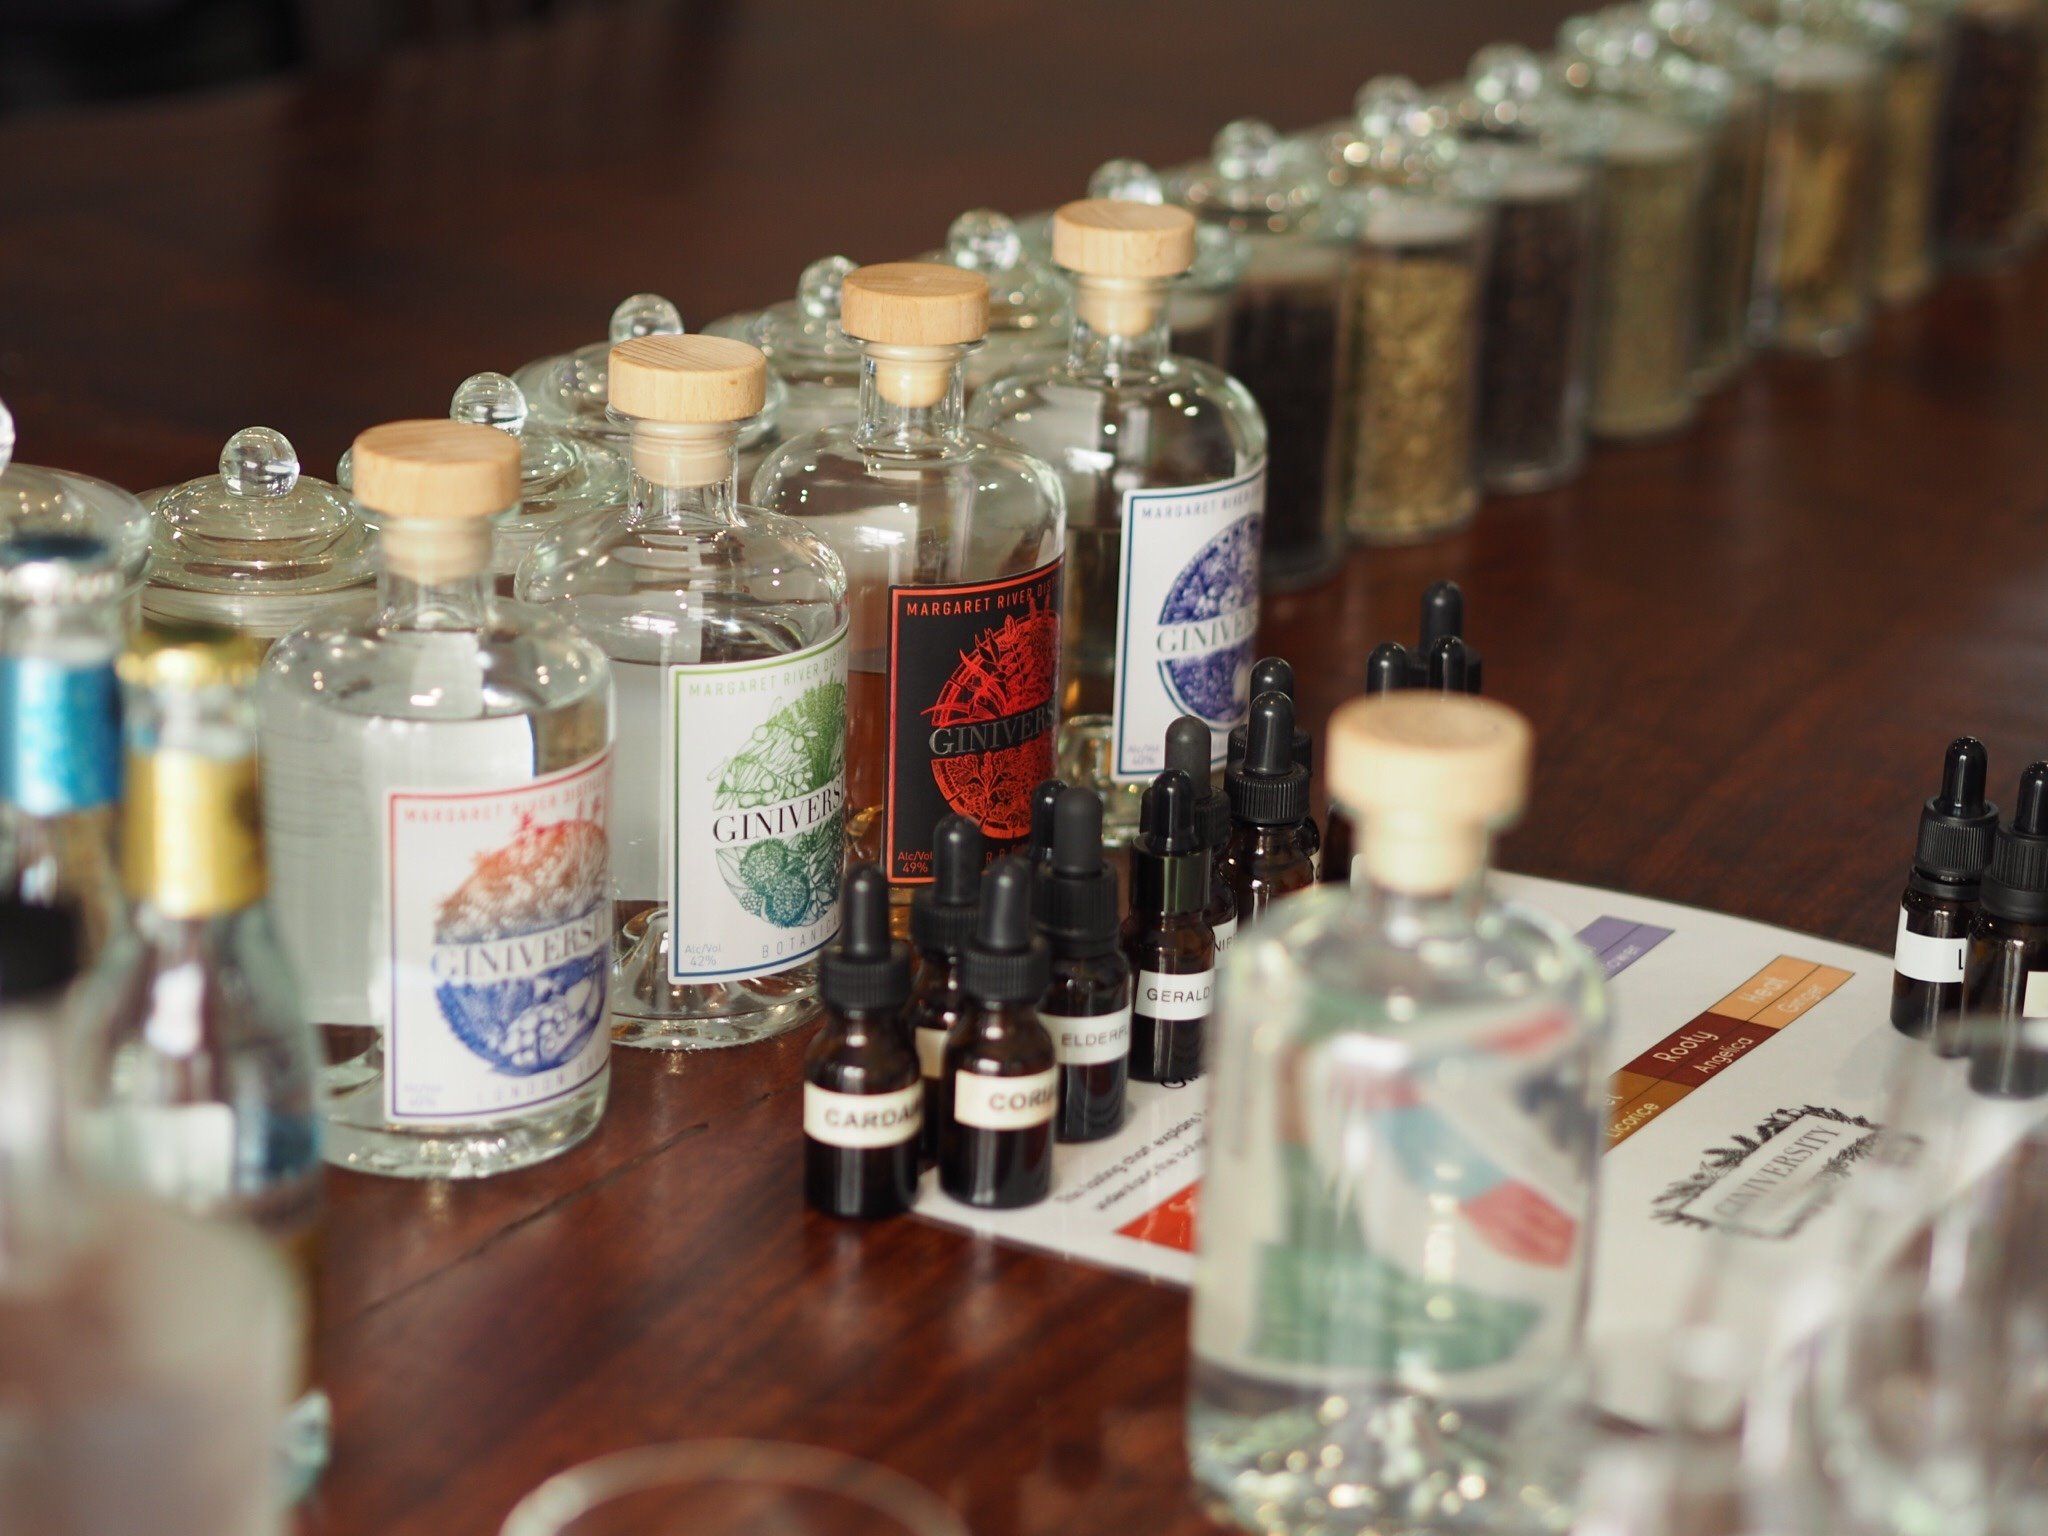 Giniversity Learn How to Make Gin Workshop